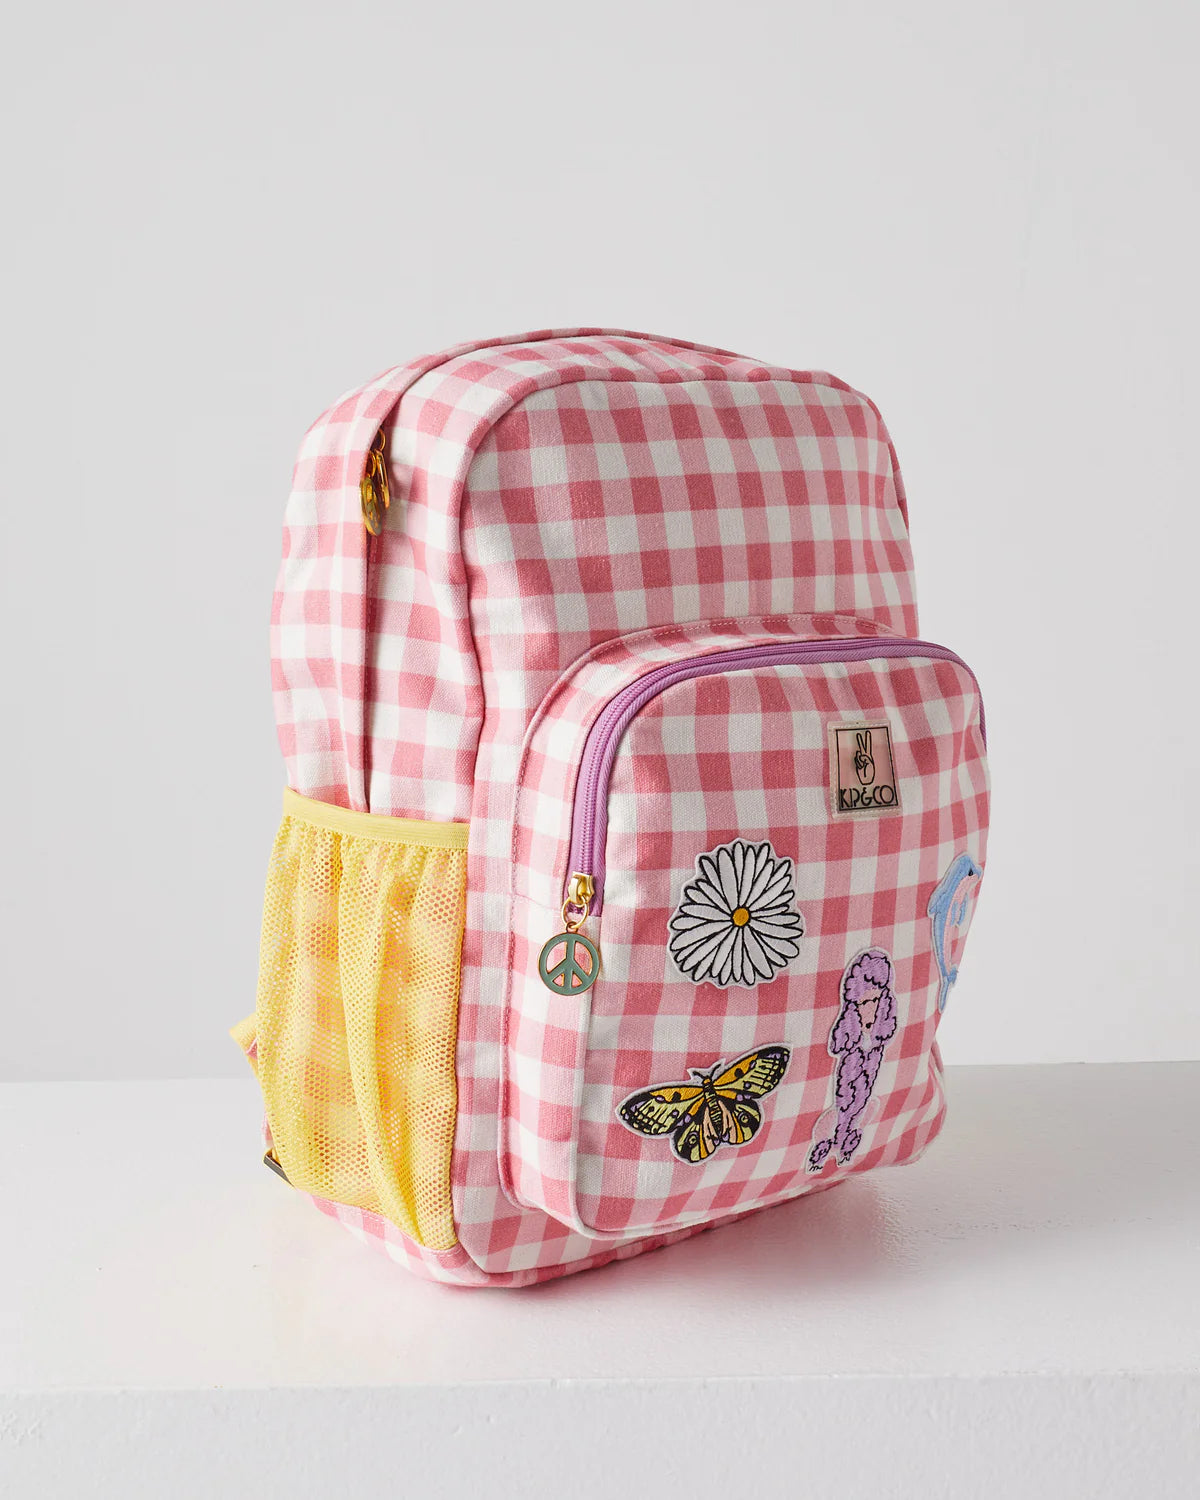 KIP & CO FUNTIMES GINGHAM BACKPACK | The Ivy Plant Studio